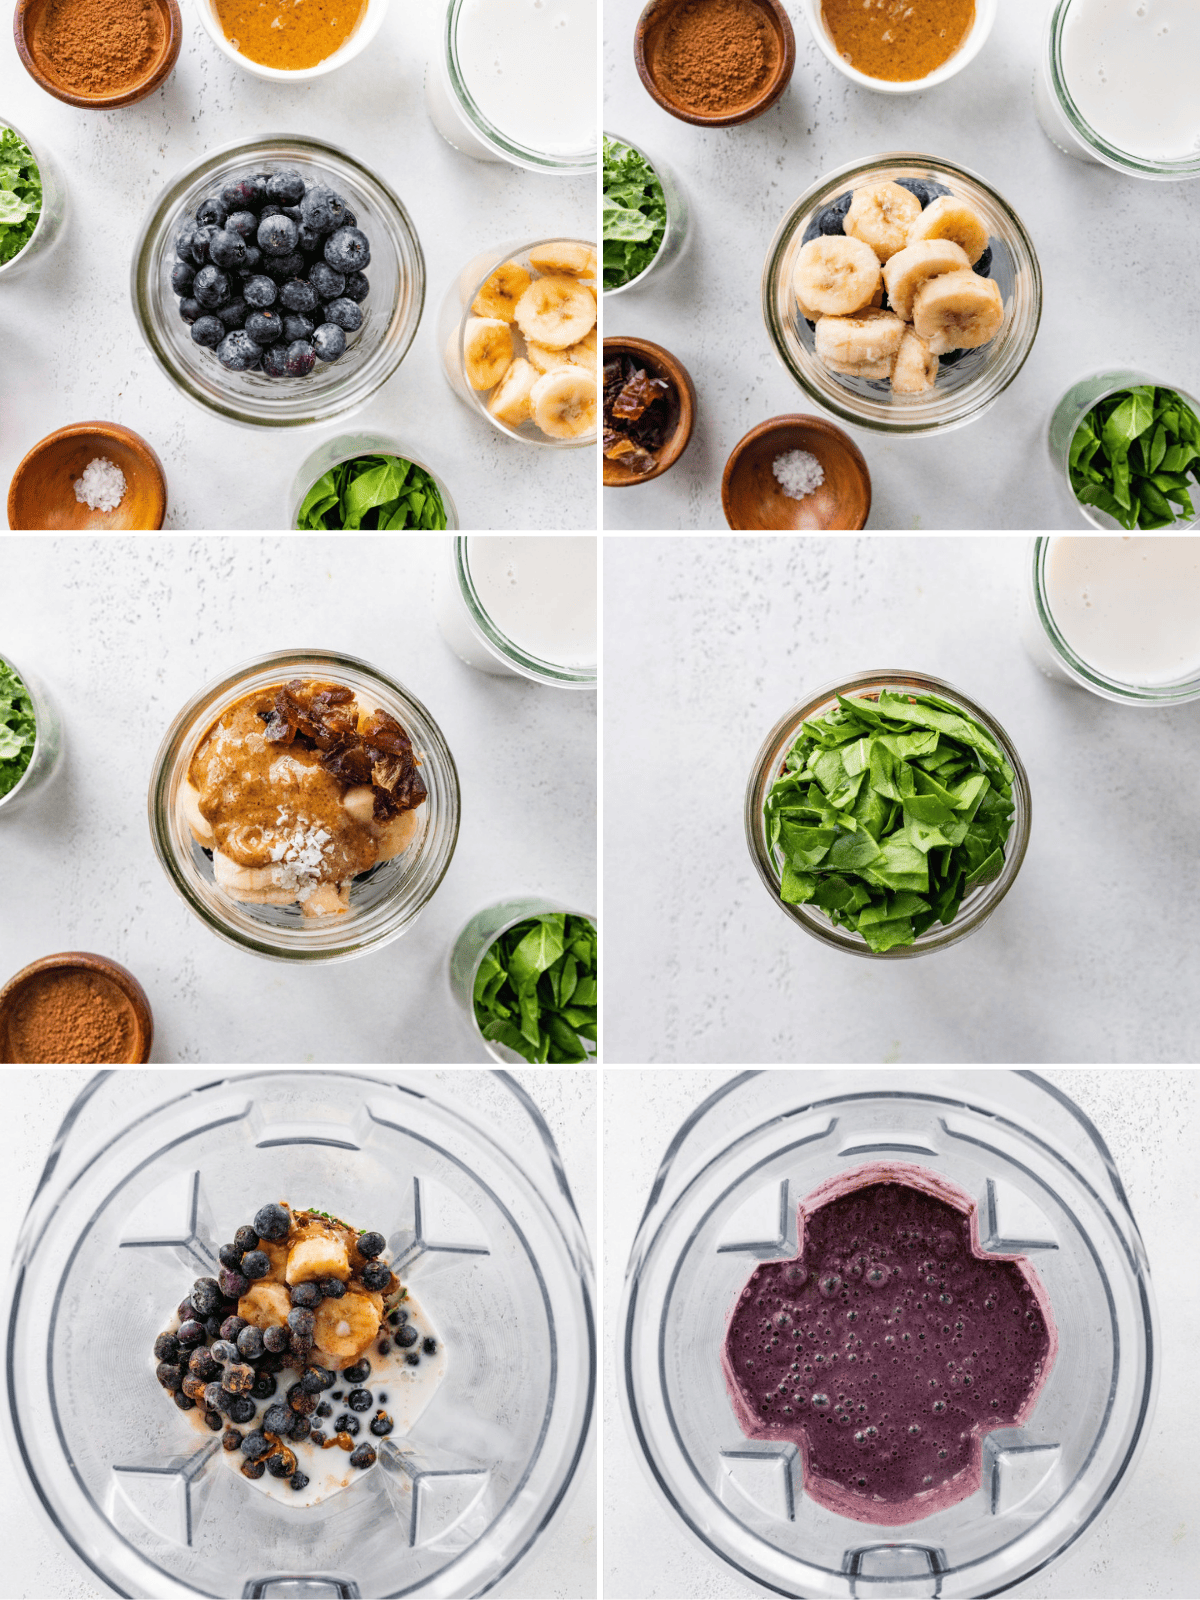 A 6 photo collage showing how to make a chocolate blueberry smoothie.